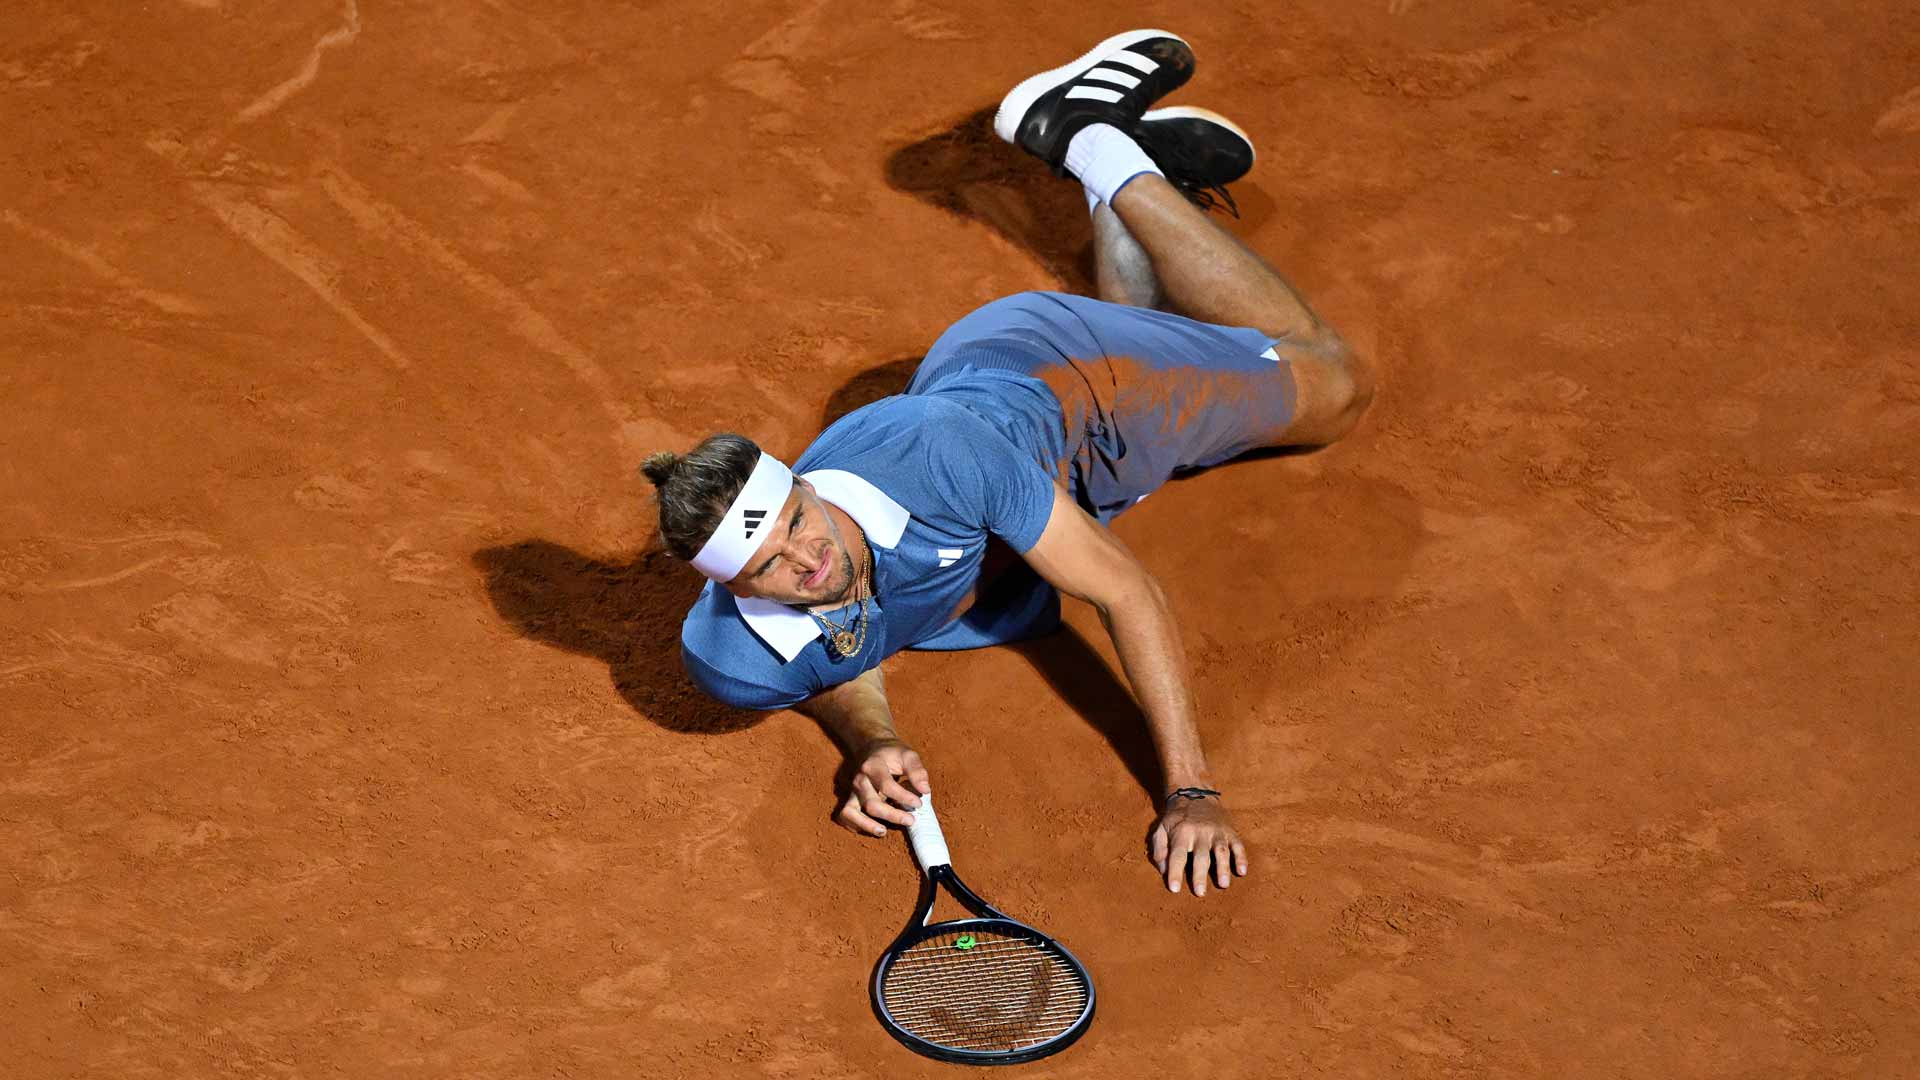 Zverev fights on after scary fall in Rome